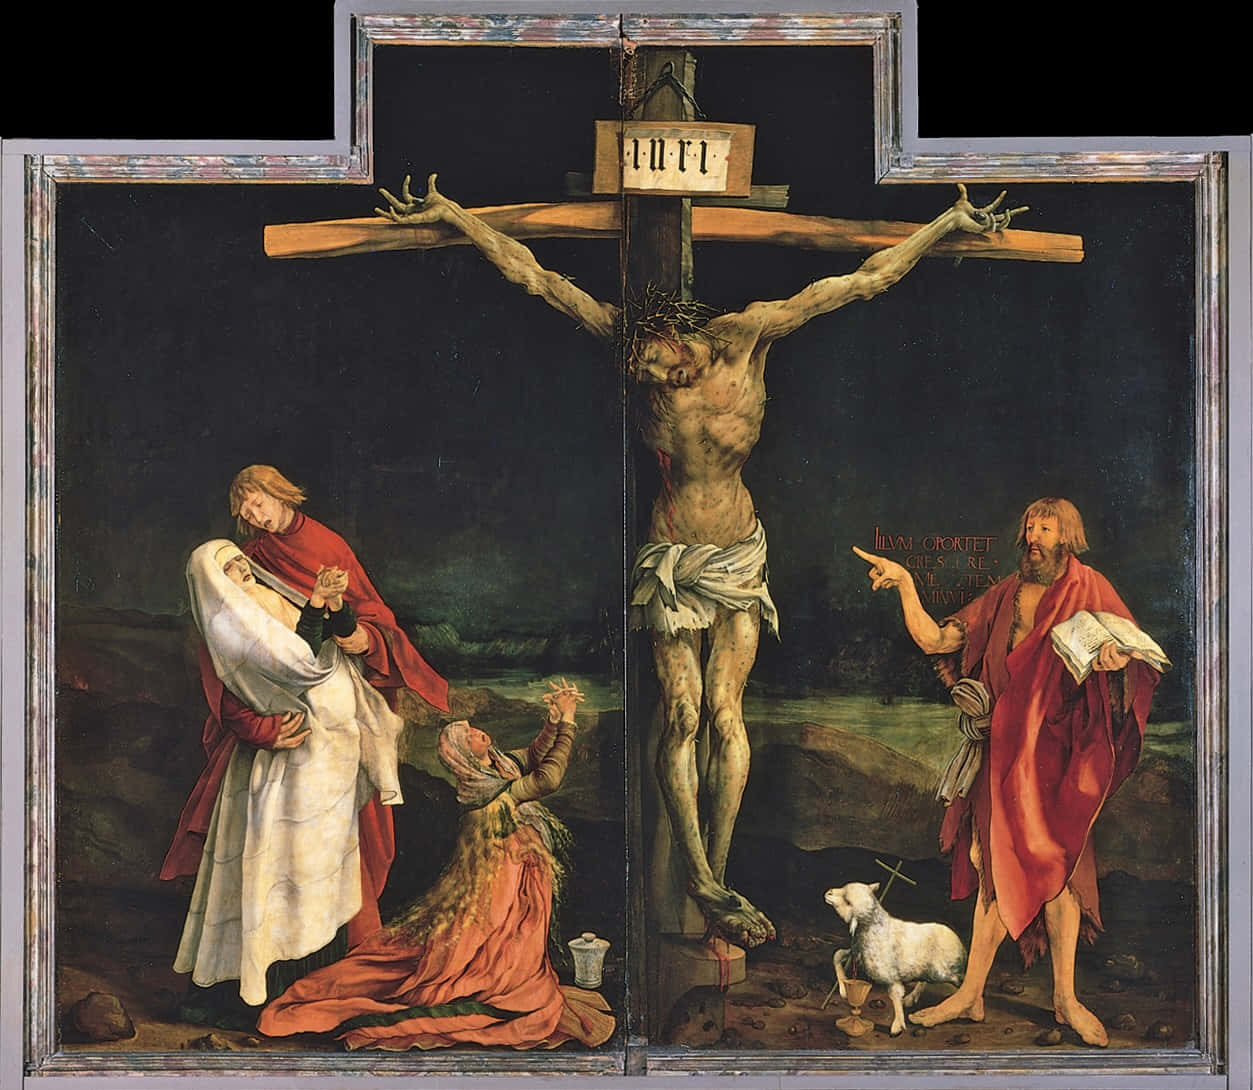 The Crucifixion of Jesus Christ on Good Friday